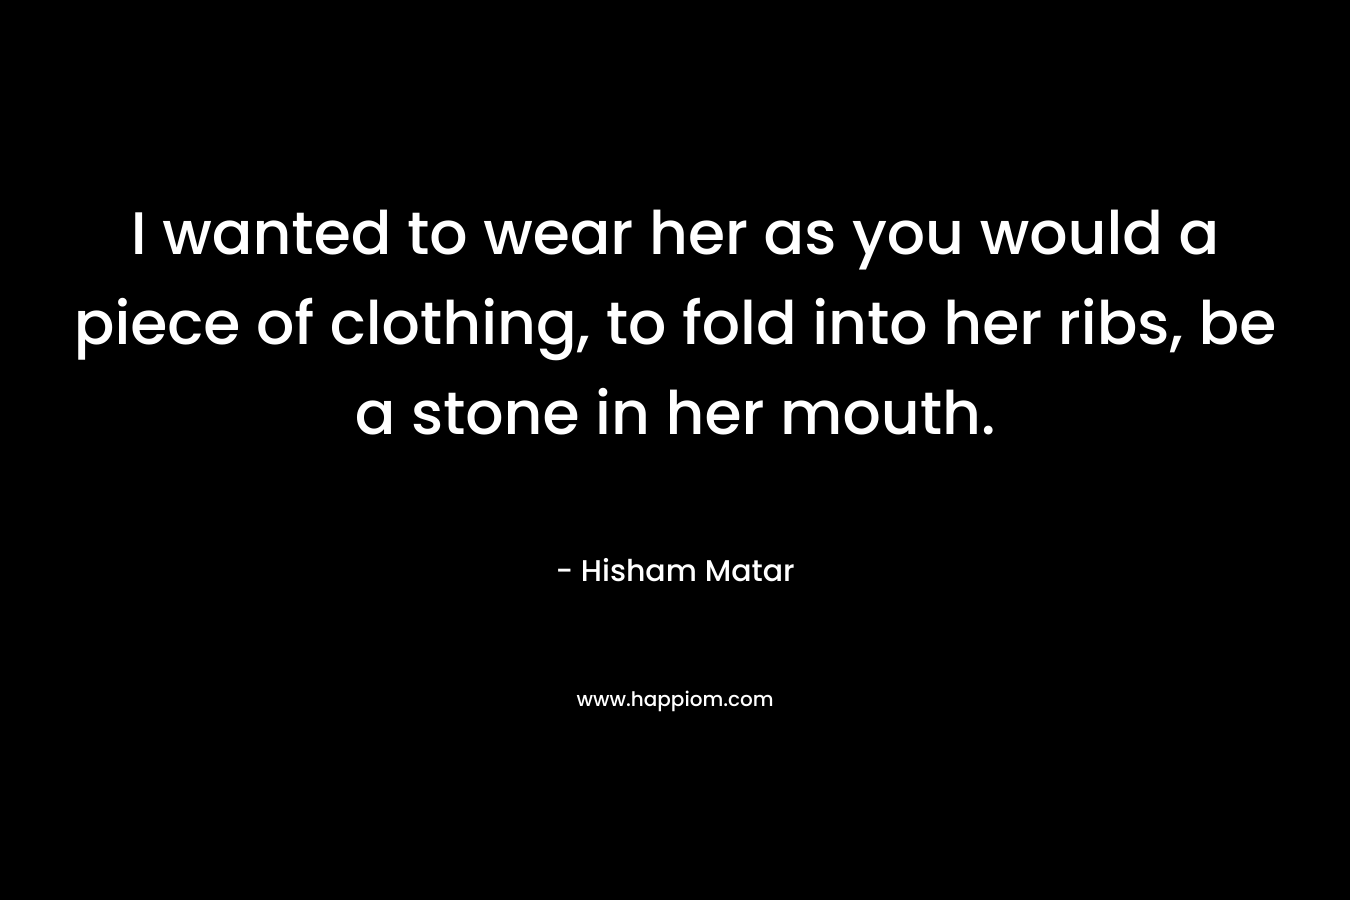 I wanted to wear her as you would a piece of clothing, to fold into her ribs, be a stone in her mouth.